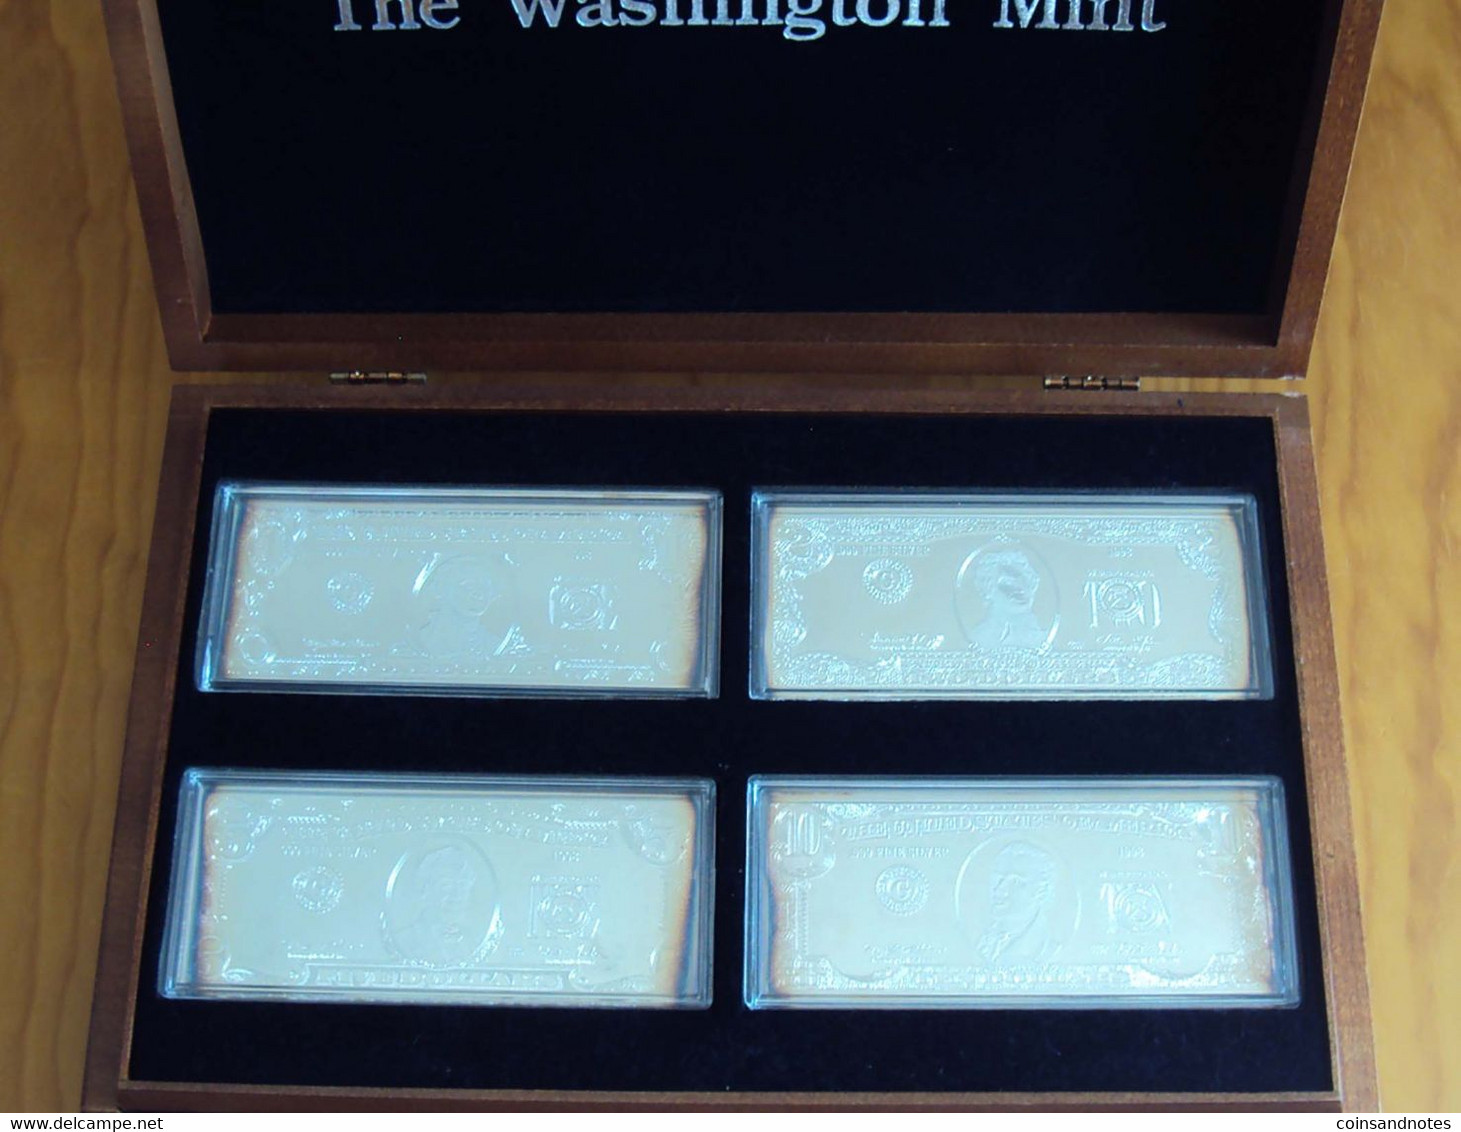 USA 1998 - The Washington Mint - Wooden Box 7 X 4 Troy Oz Silver Banknotes - Proof - Collections